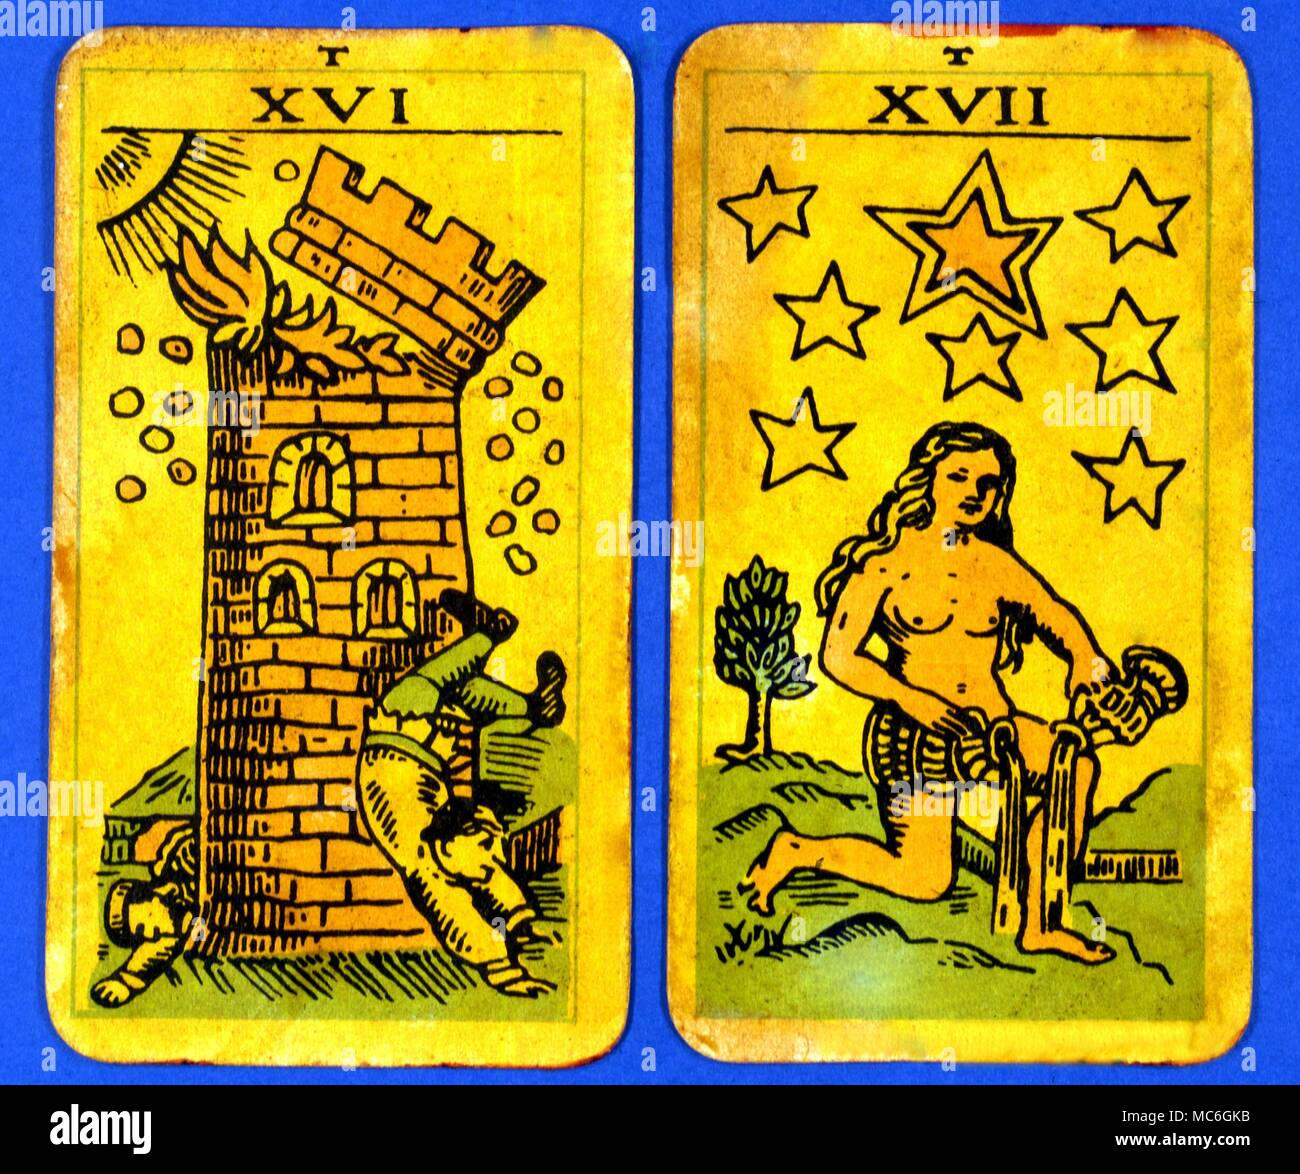 Tarot Cards-Majo Arcana- The Parisian Tarot. Card 16. The House of God, and  Card 17. The Star. Two cards from a Major Arcana picture Tarot,adapted by a  Wiccan group. Probably designed in